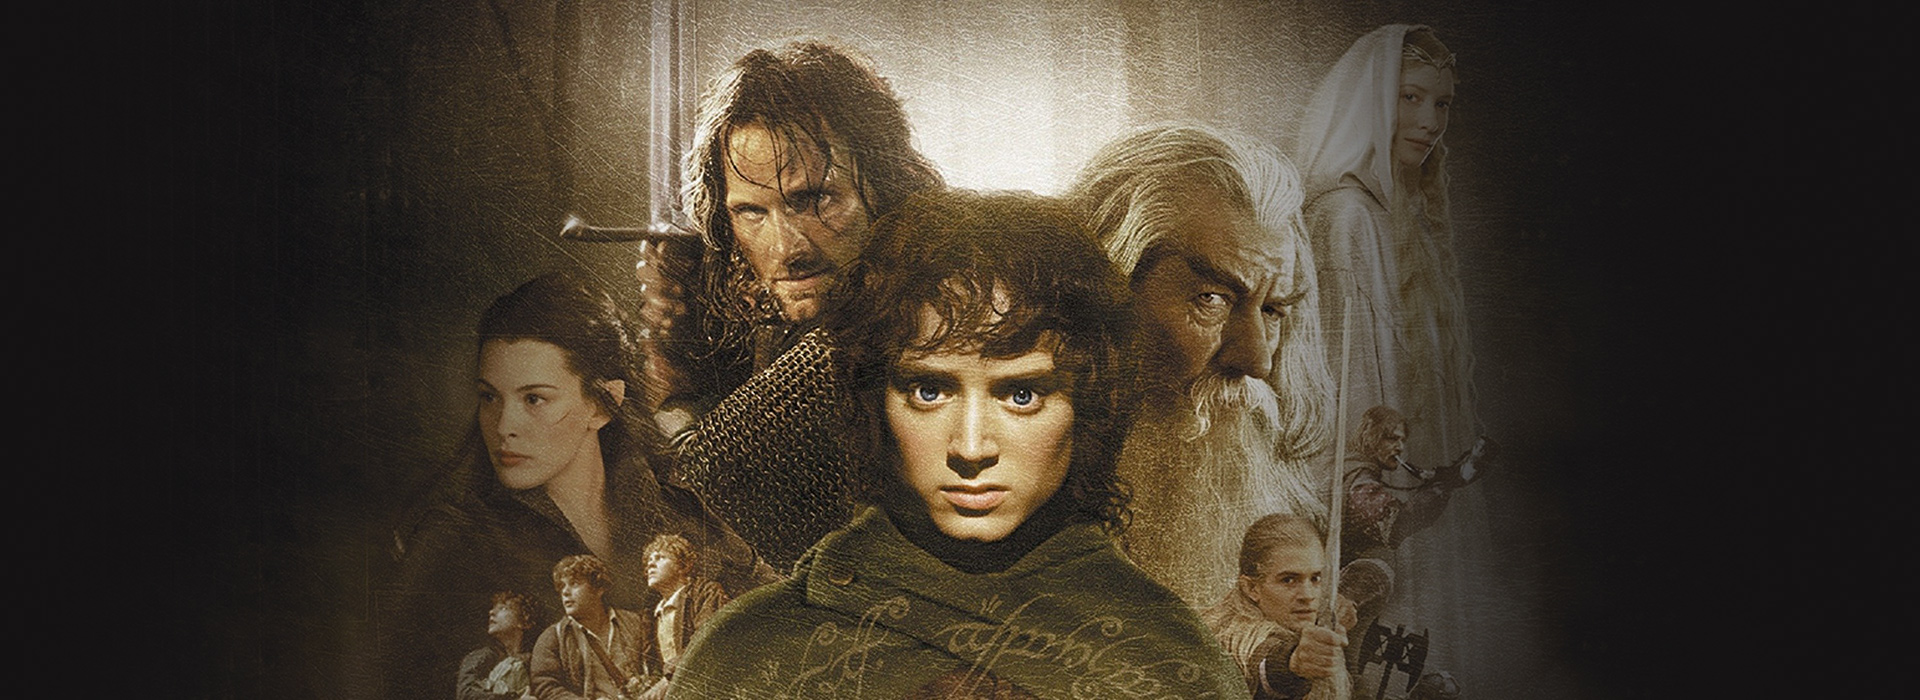 Movie poster Lord of The Rings: Fellowship of The Ring